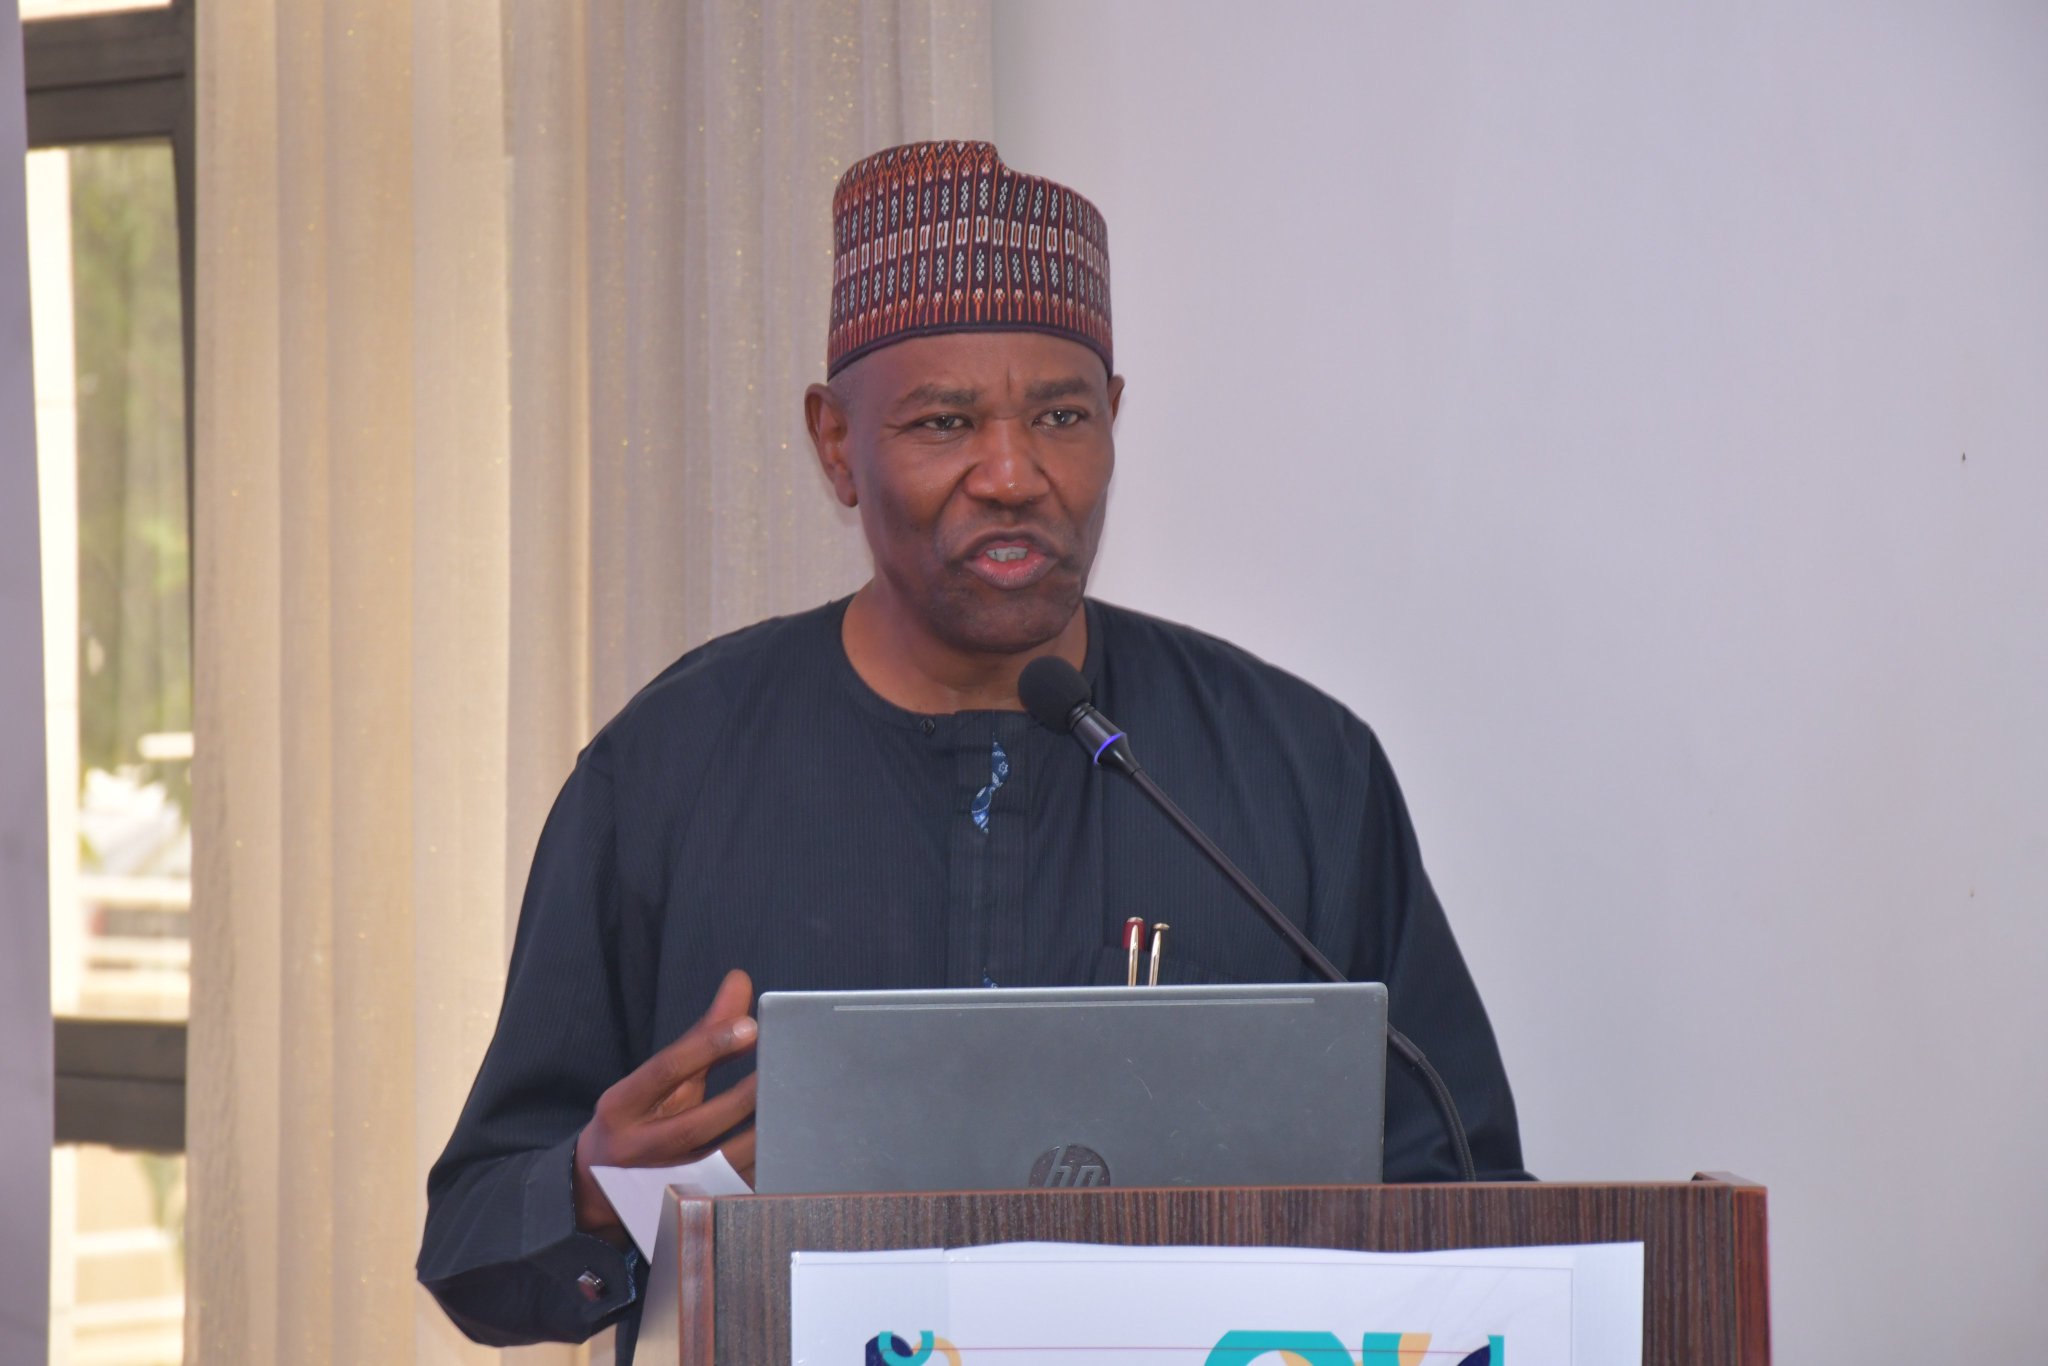 Professor Umaru A. Pate, Vice-Chancellor, Federal University, Kashere, Gombe State.